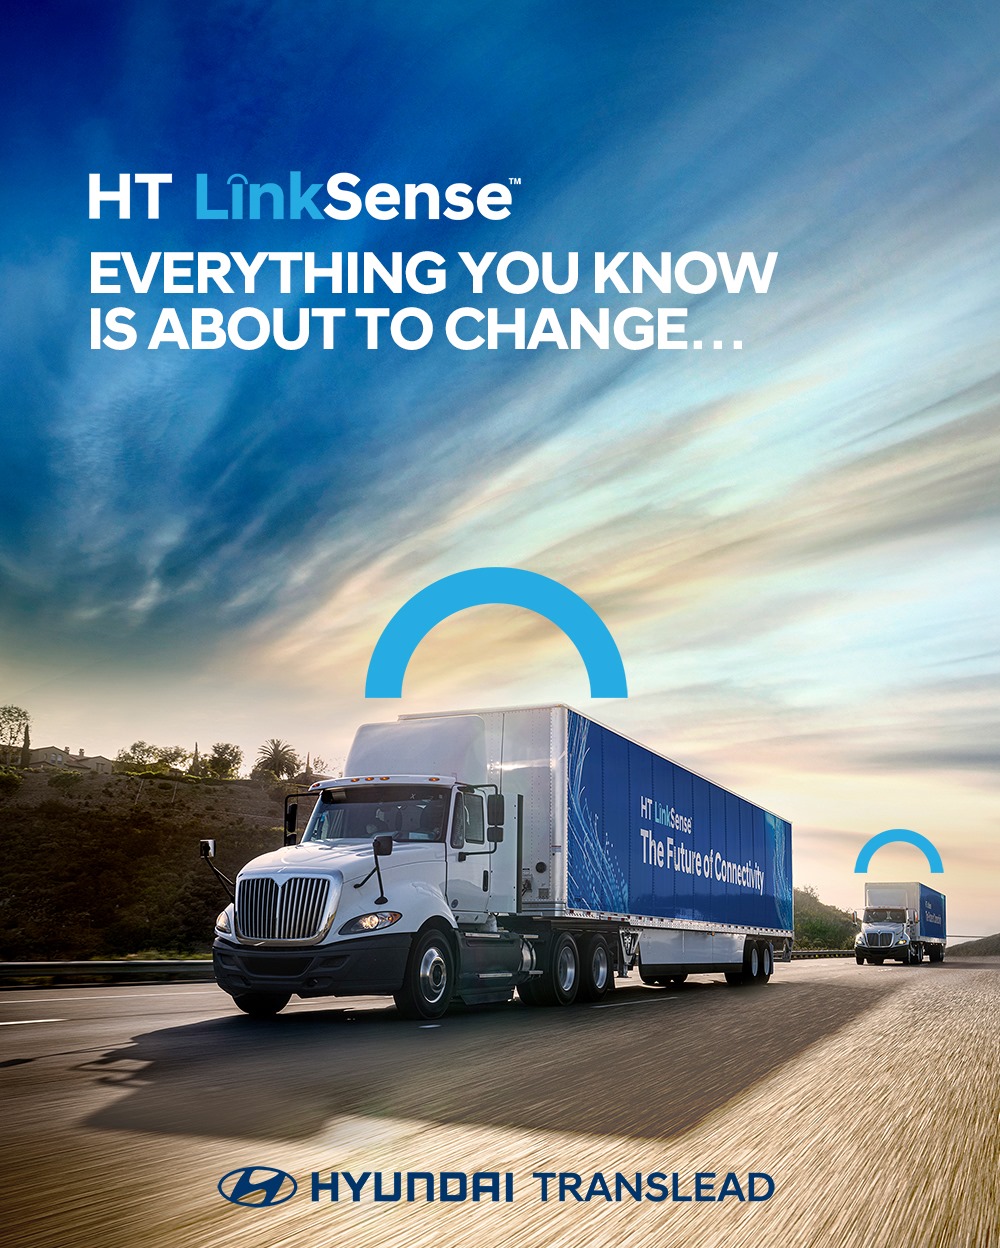 Two Hyundai Translead Semi trailers equipped with HT Linksense